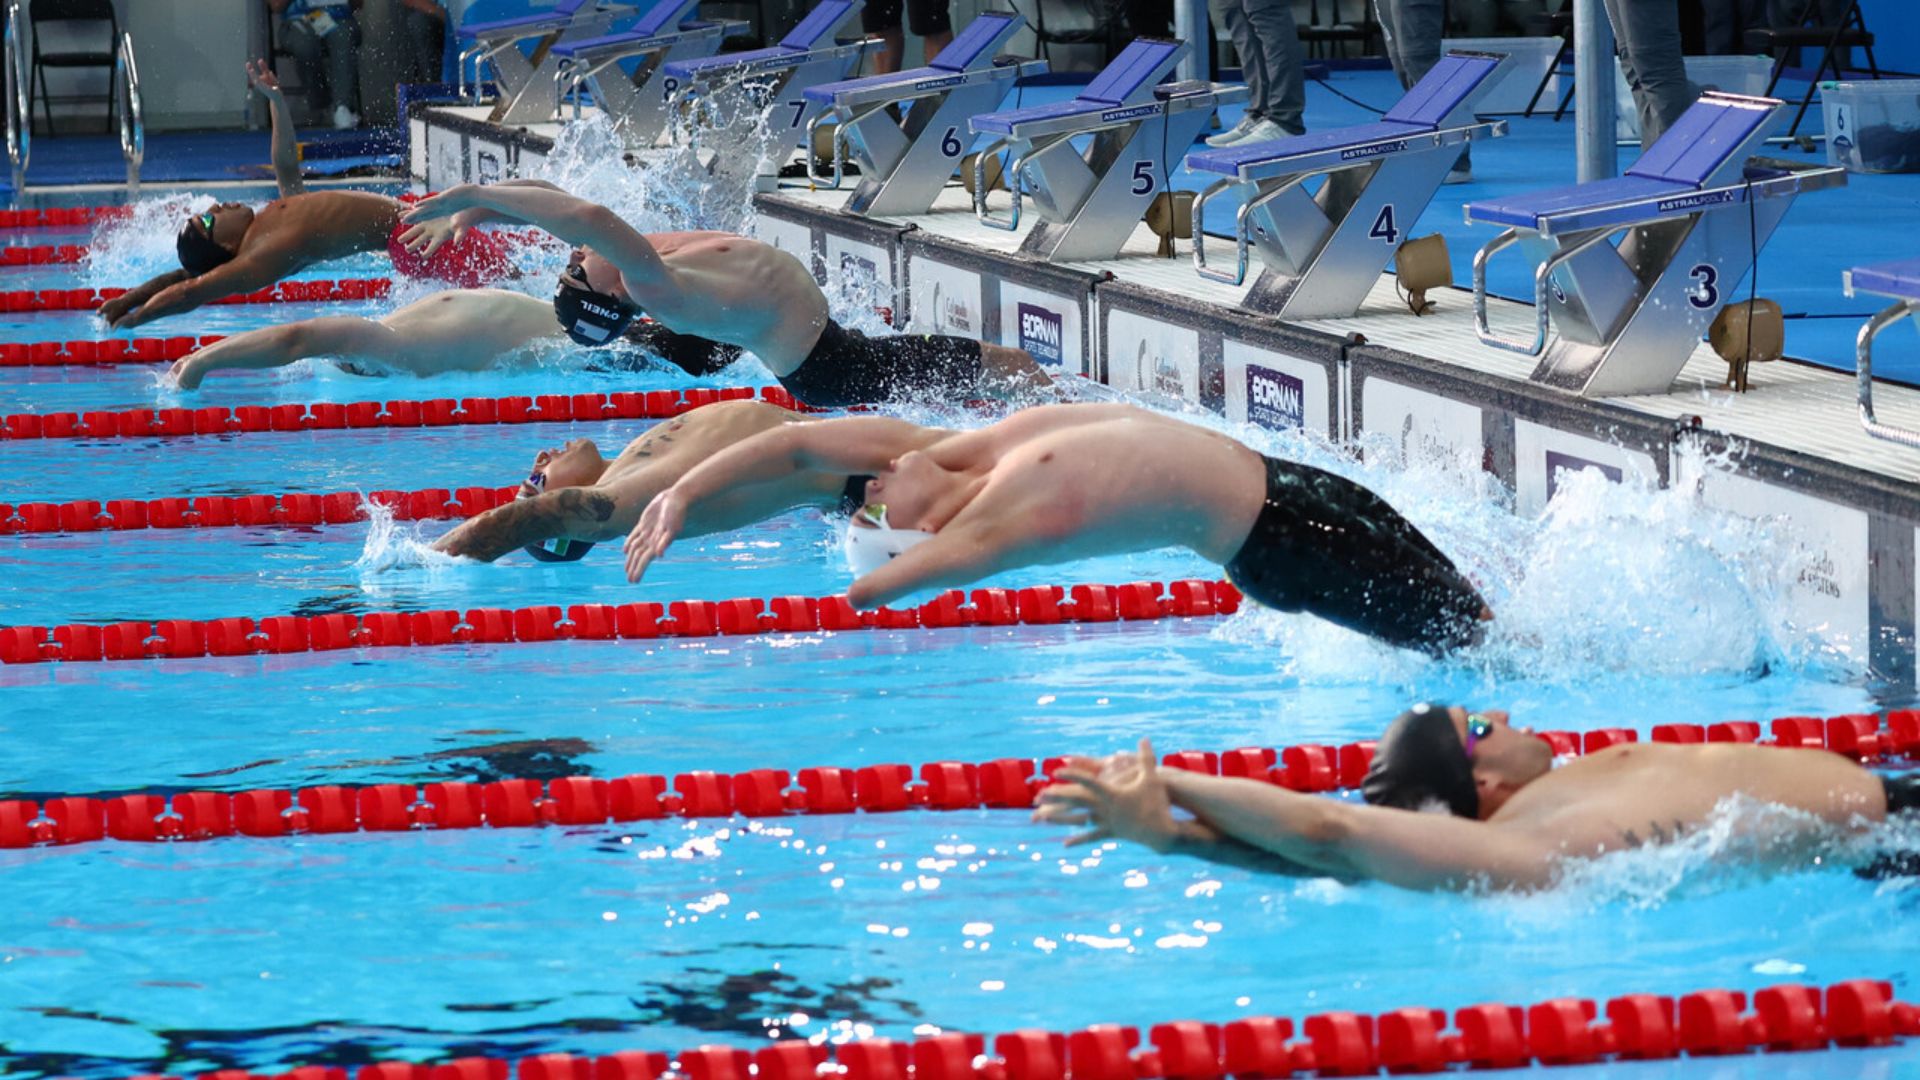 Brazil Expands its Gold Rush in Para Swimming Thanks to Relays